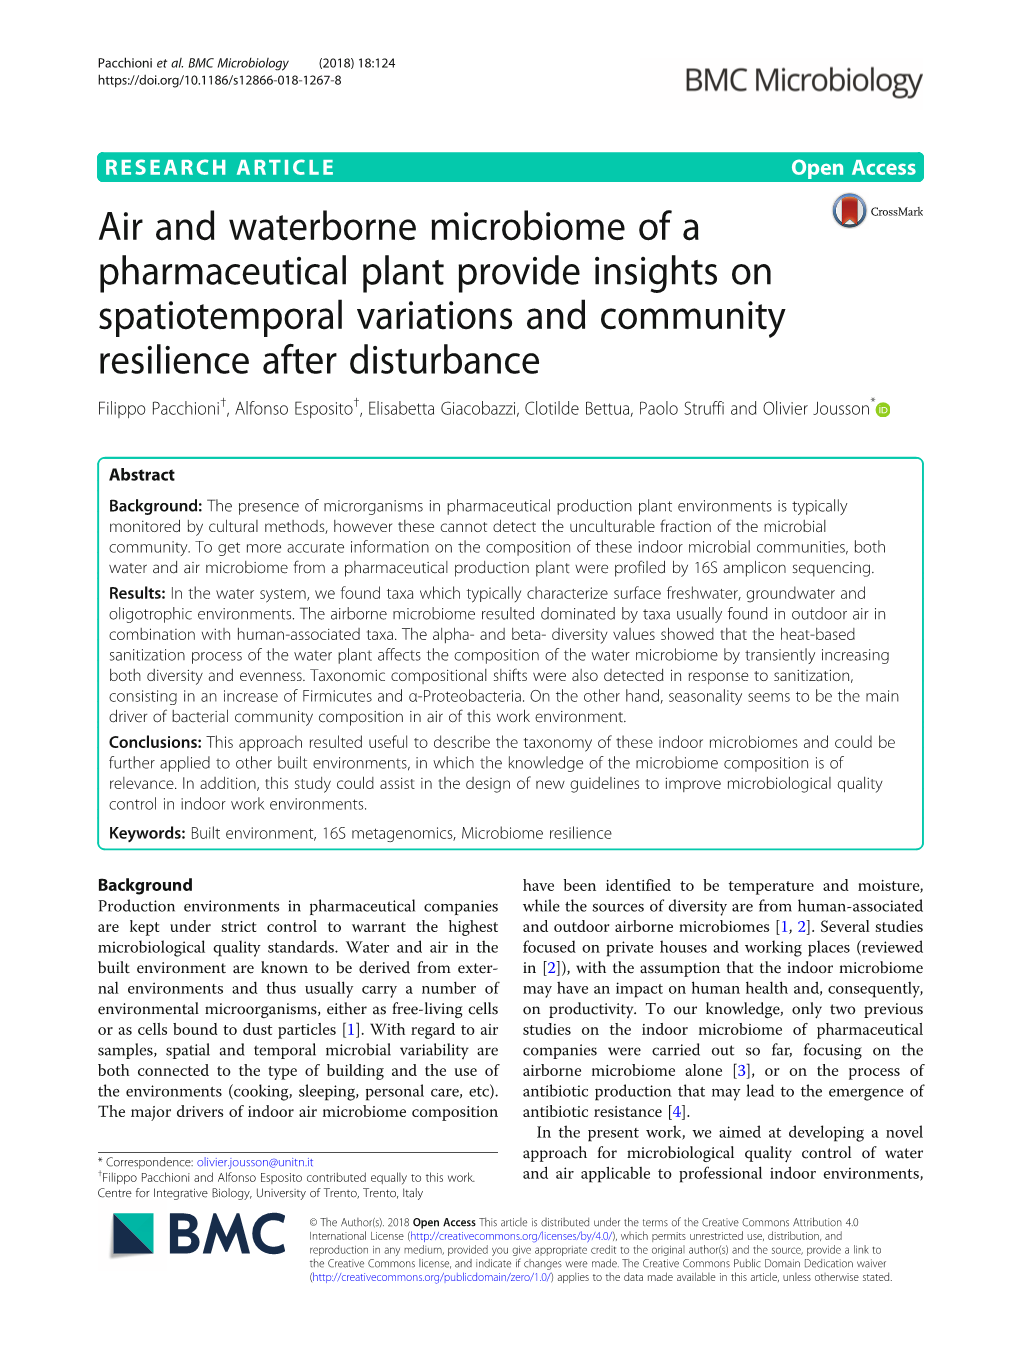 Air and Waterborne Microbiome of a Pharmaceutical Plant Provide